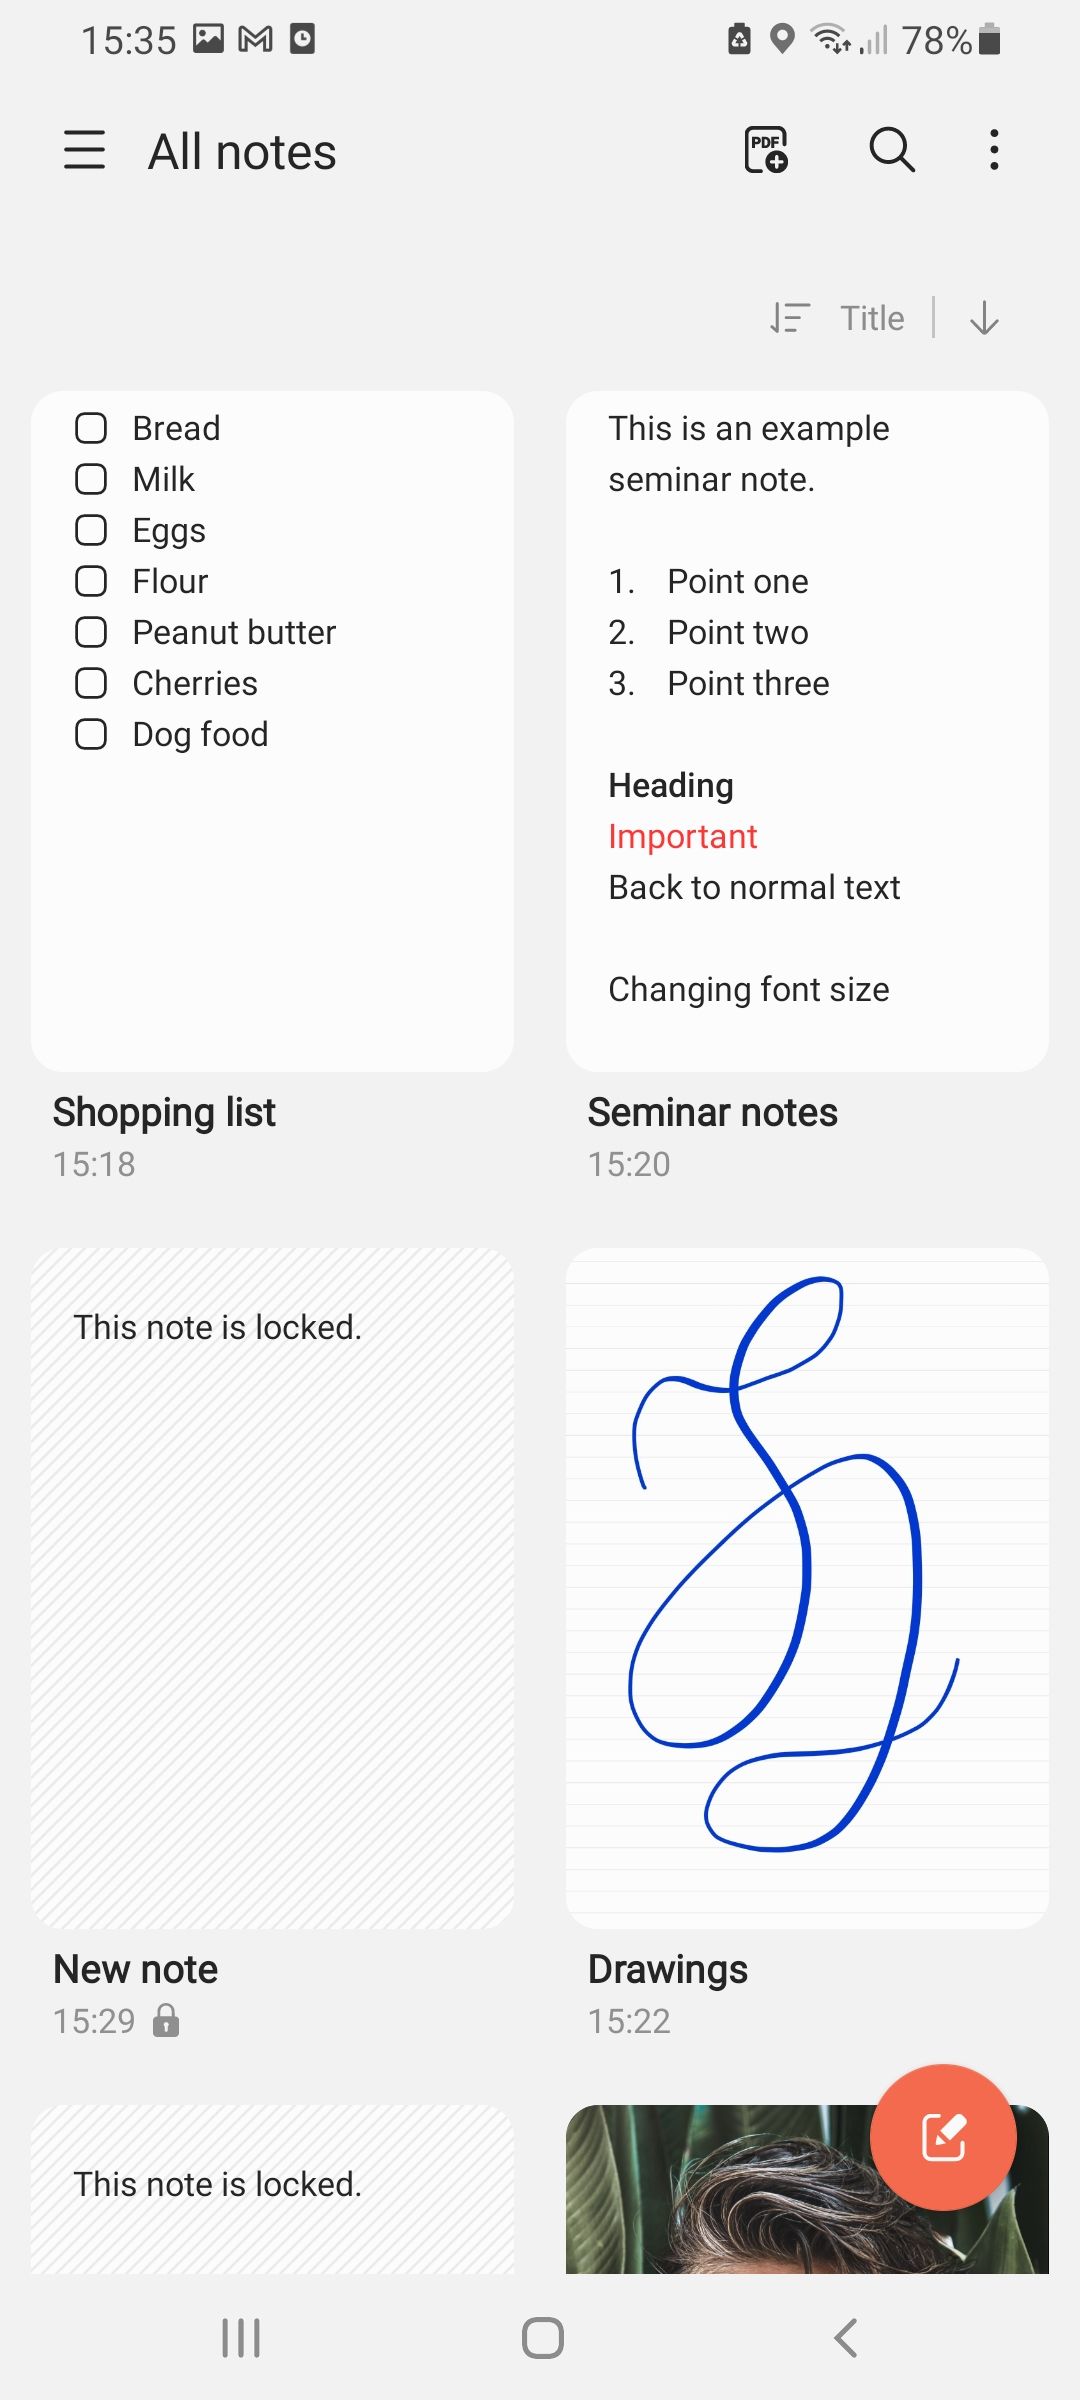 What does a locked note look like in Samsung Notes